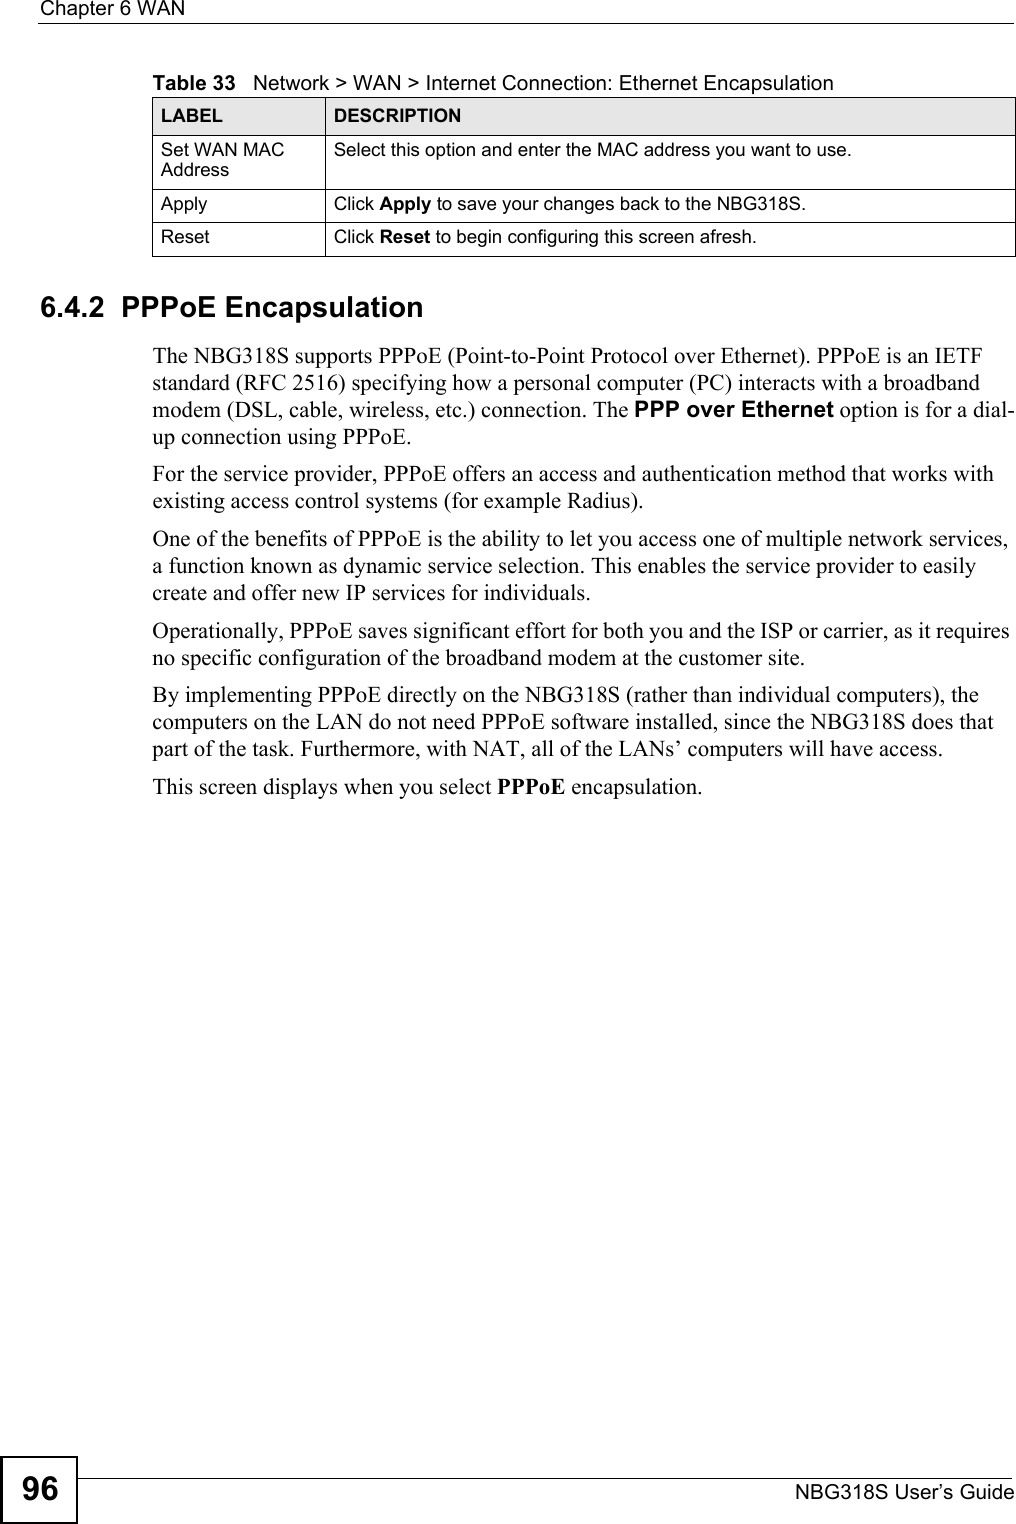 Chapter 6 WANNBG318S User’s Guide966.4.2  PPPoE EncapsulationThe NBG318S supports PPPoE (Point-to-Point Protocol over Ethernet). PPPoE is an IETF standard (RFC 2516) specifying how a personal computer (PC) interacts with a broadband modem (DSL, cable, wireless, etc.) connection. The PPP over Ethernet option is for a dial-up connection using PPPoE.For the service provider, PPPoE offers an access and authentication method that works with existing access control systems (for example Radius).One of the benefits of PPPoE is the ability to let you access one of multiple network services, a function known as dynamic service selection. This enables the service provider to easily create and offer new IP services for individuals.Operationally, PPPoE saves significant effort for both you and the ISP or carrier, as it requires no specific configuration of the broadband modem at the customer site.By implementing PPPoE directly on the NBG318S (rather than individual computers), the computers on the LAN do not need PPPoE software installed, since the NBG318S does that part of the task. Furthermore, with NAT, all of the LANs’ computers will have access.This screen displays when you select PPPoE encapsulation.Set WAN MAC AddressSelect this option and enter the MAC address you want to use.Apply Click Apply to save your changes back to the NBG318S.Reset Click Reset to begin configuring this screen afresh.Table 33   Network &gt; WAN &gt; Internet Connection: Ethernet EncapsulationLABEL DESCRIPTION